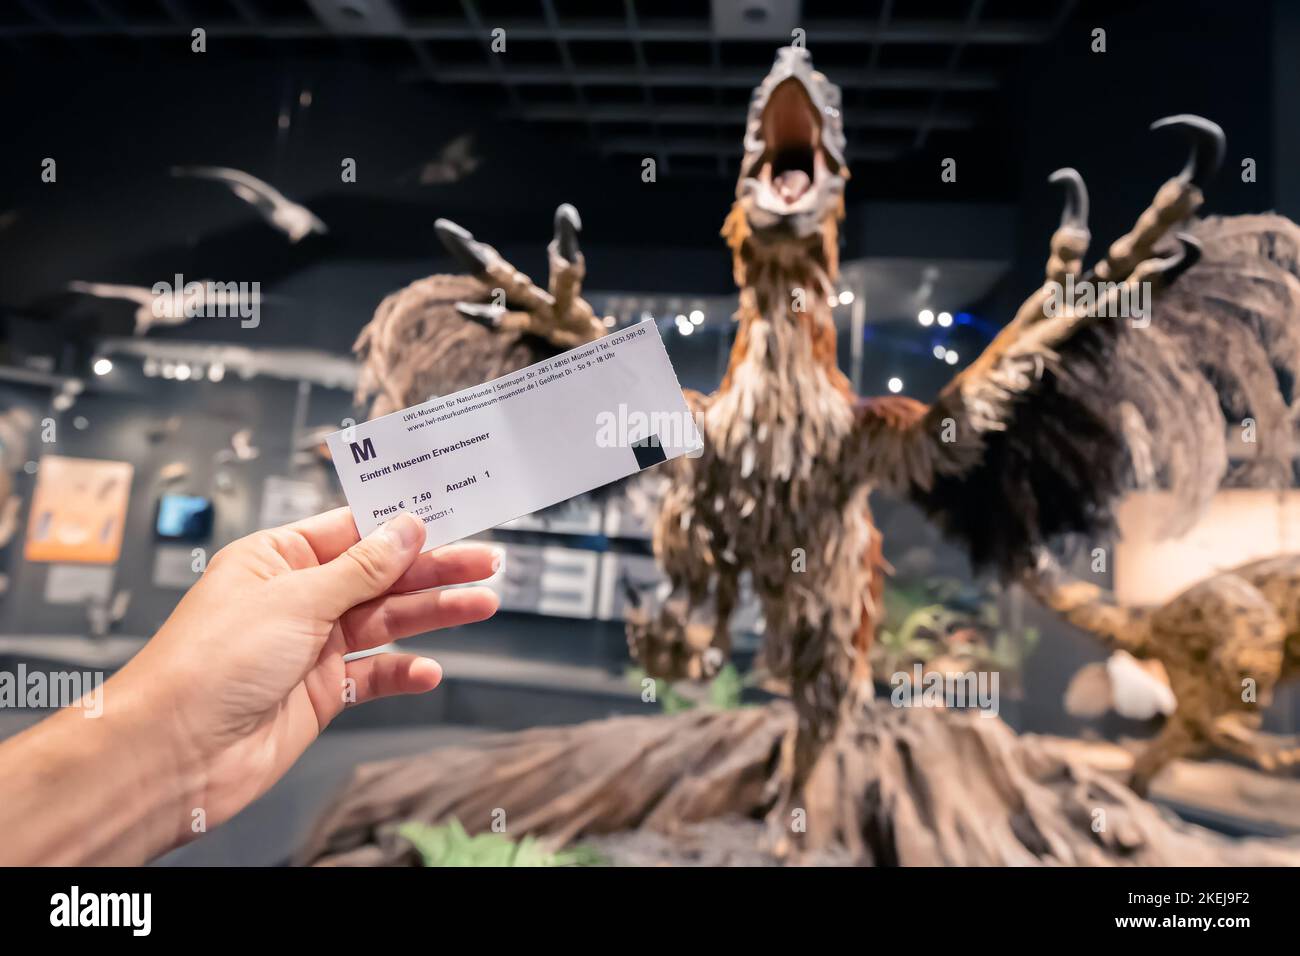 26 July 2022, Munster Natural History Museum, Germany: Hand with admission ticket to the dinosaur exhibition of LWL Naturkunde Stock Photo